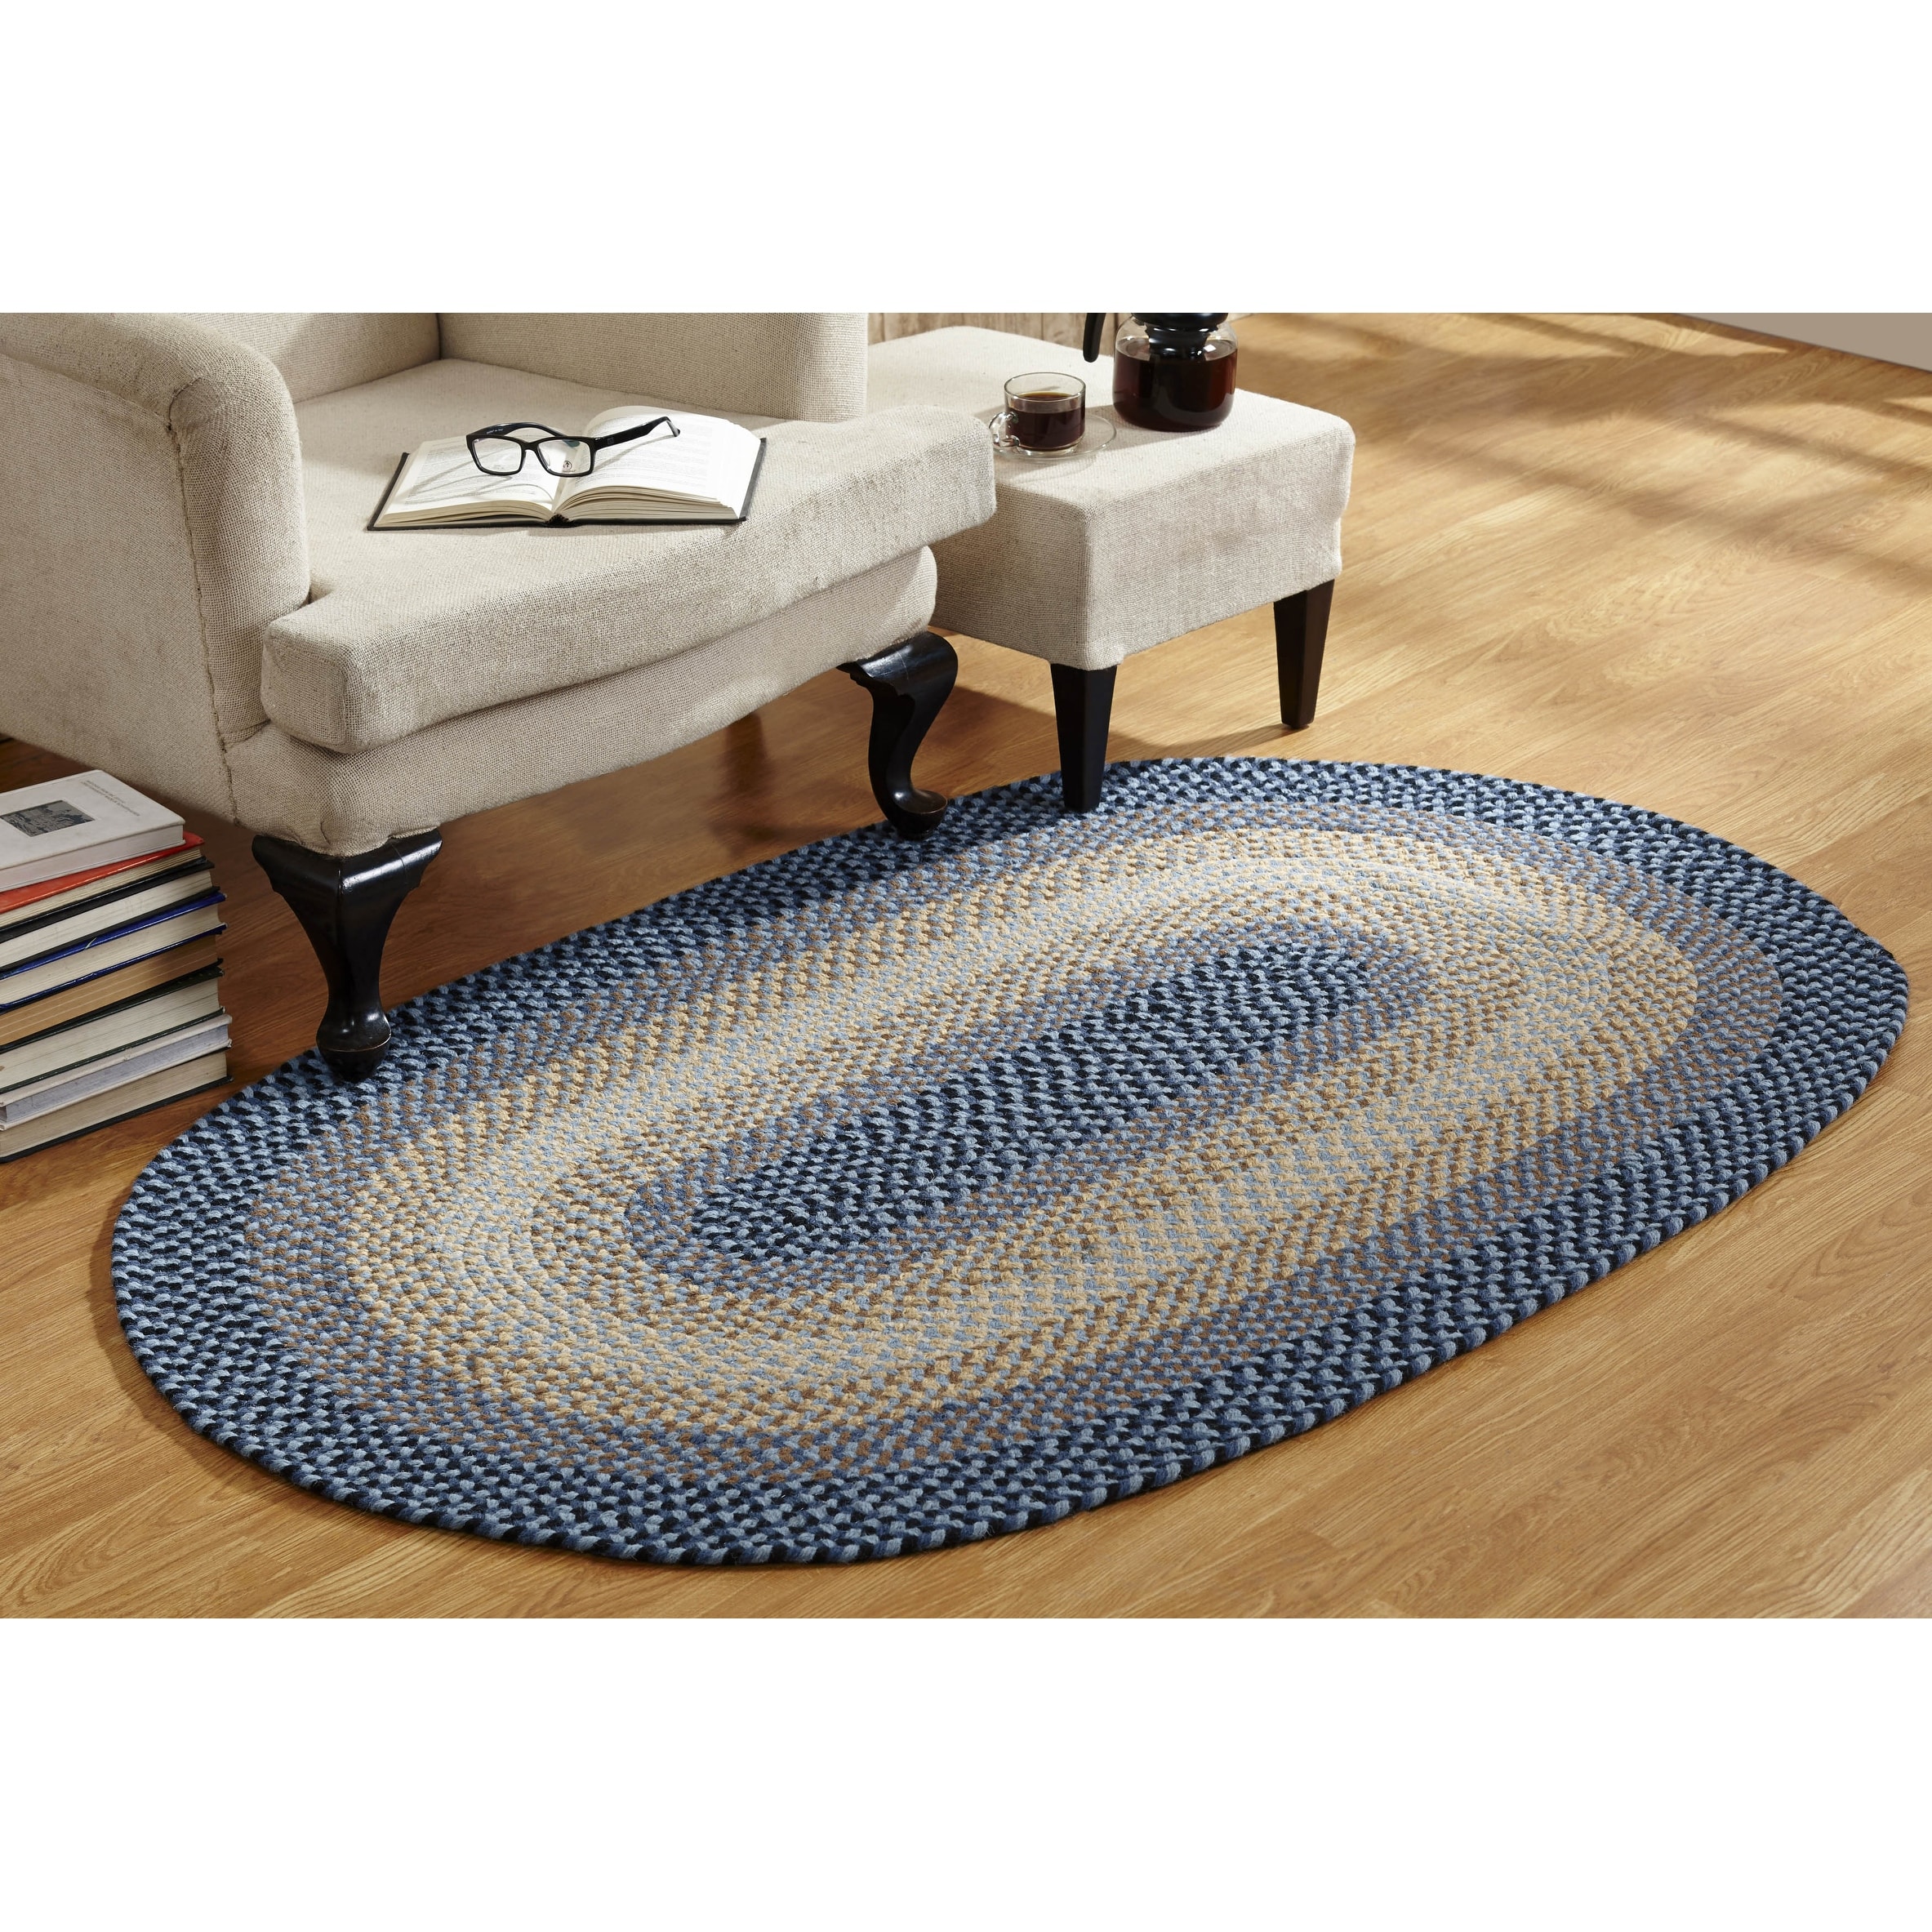 Better Trends Country Braid Collection 3 Piece Set Durable & Stain Resistant Reversible Indoor Oval Area Rug 100% Polypropylene in Vibrant Colors 20x30/20x30/36x60 Natural Blue Stripe 